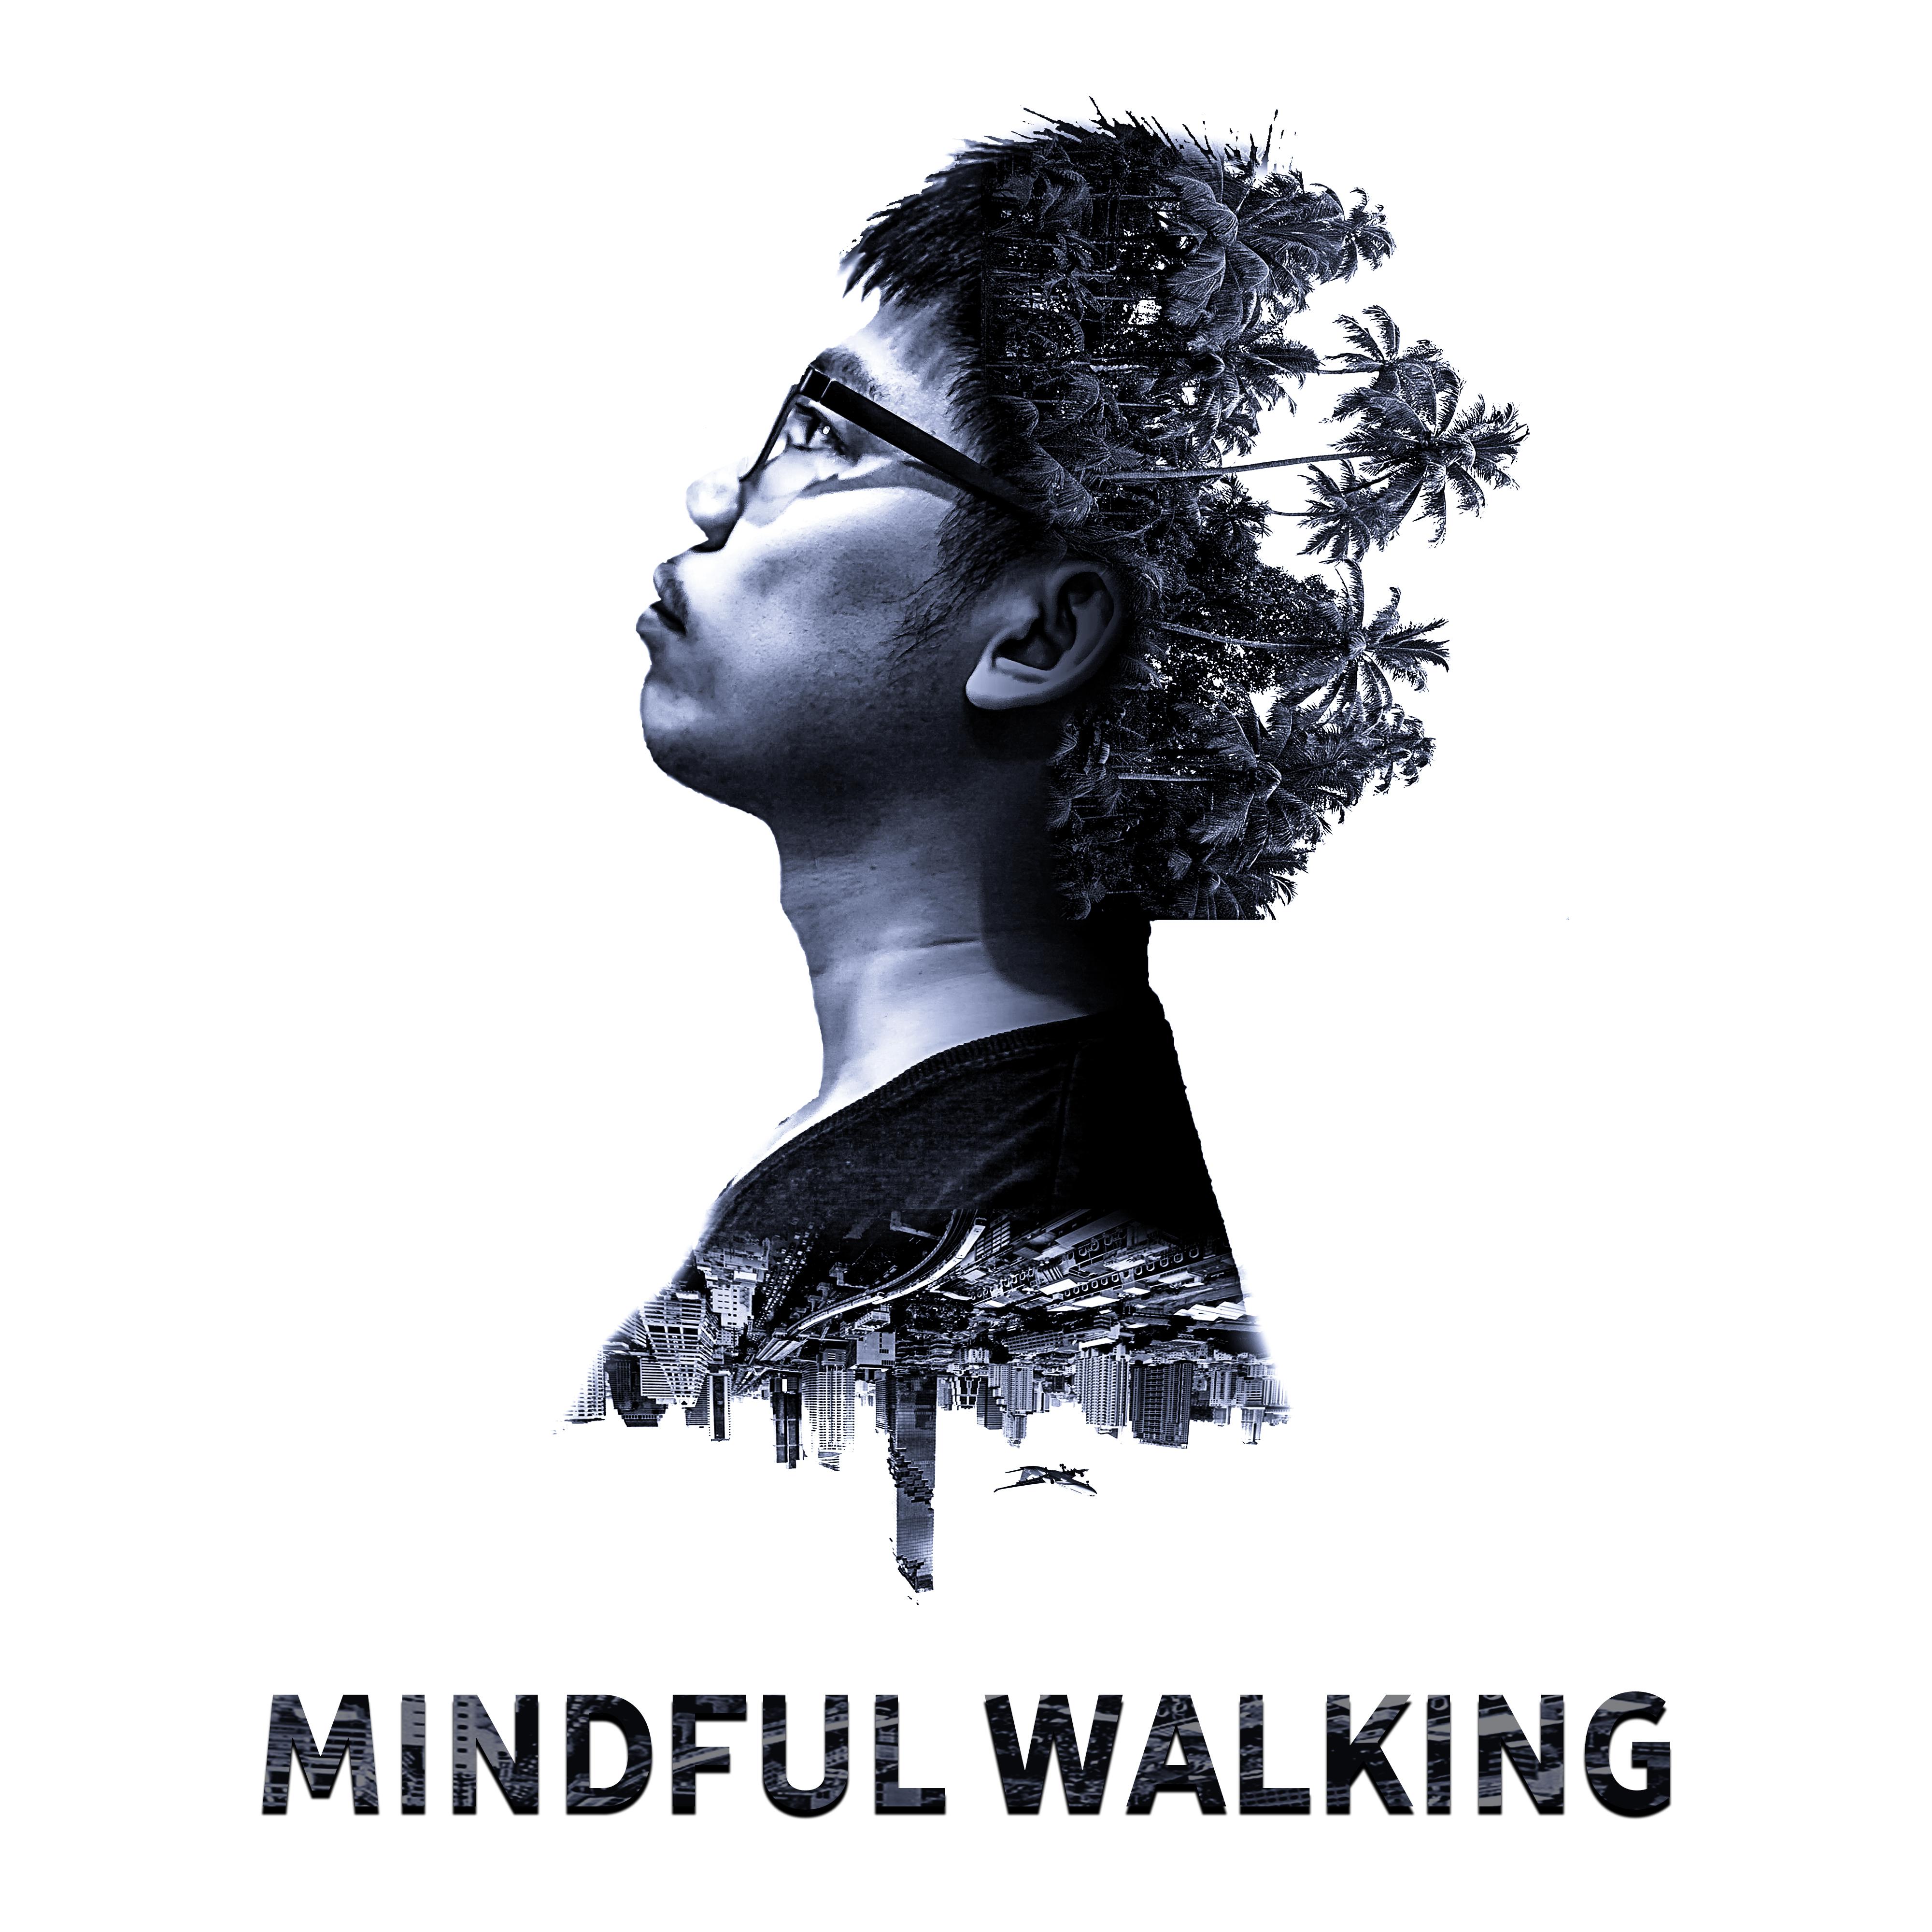 Mindful Walking – New Age Music for Meditation, Walking Meditation, Relaxed Body, Be Mindful